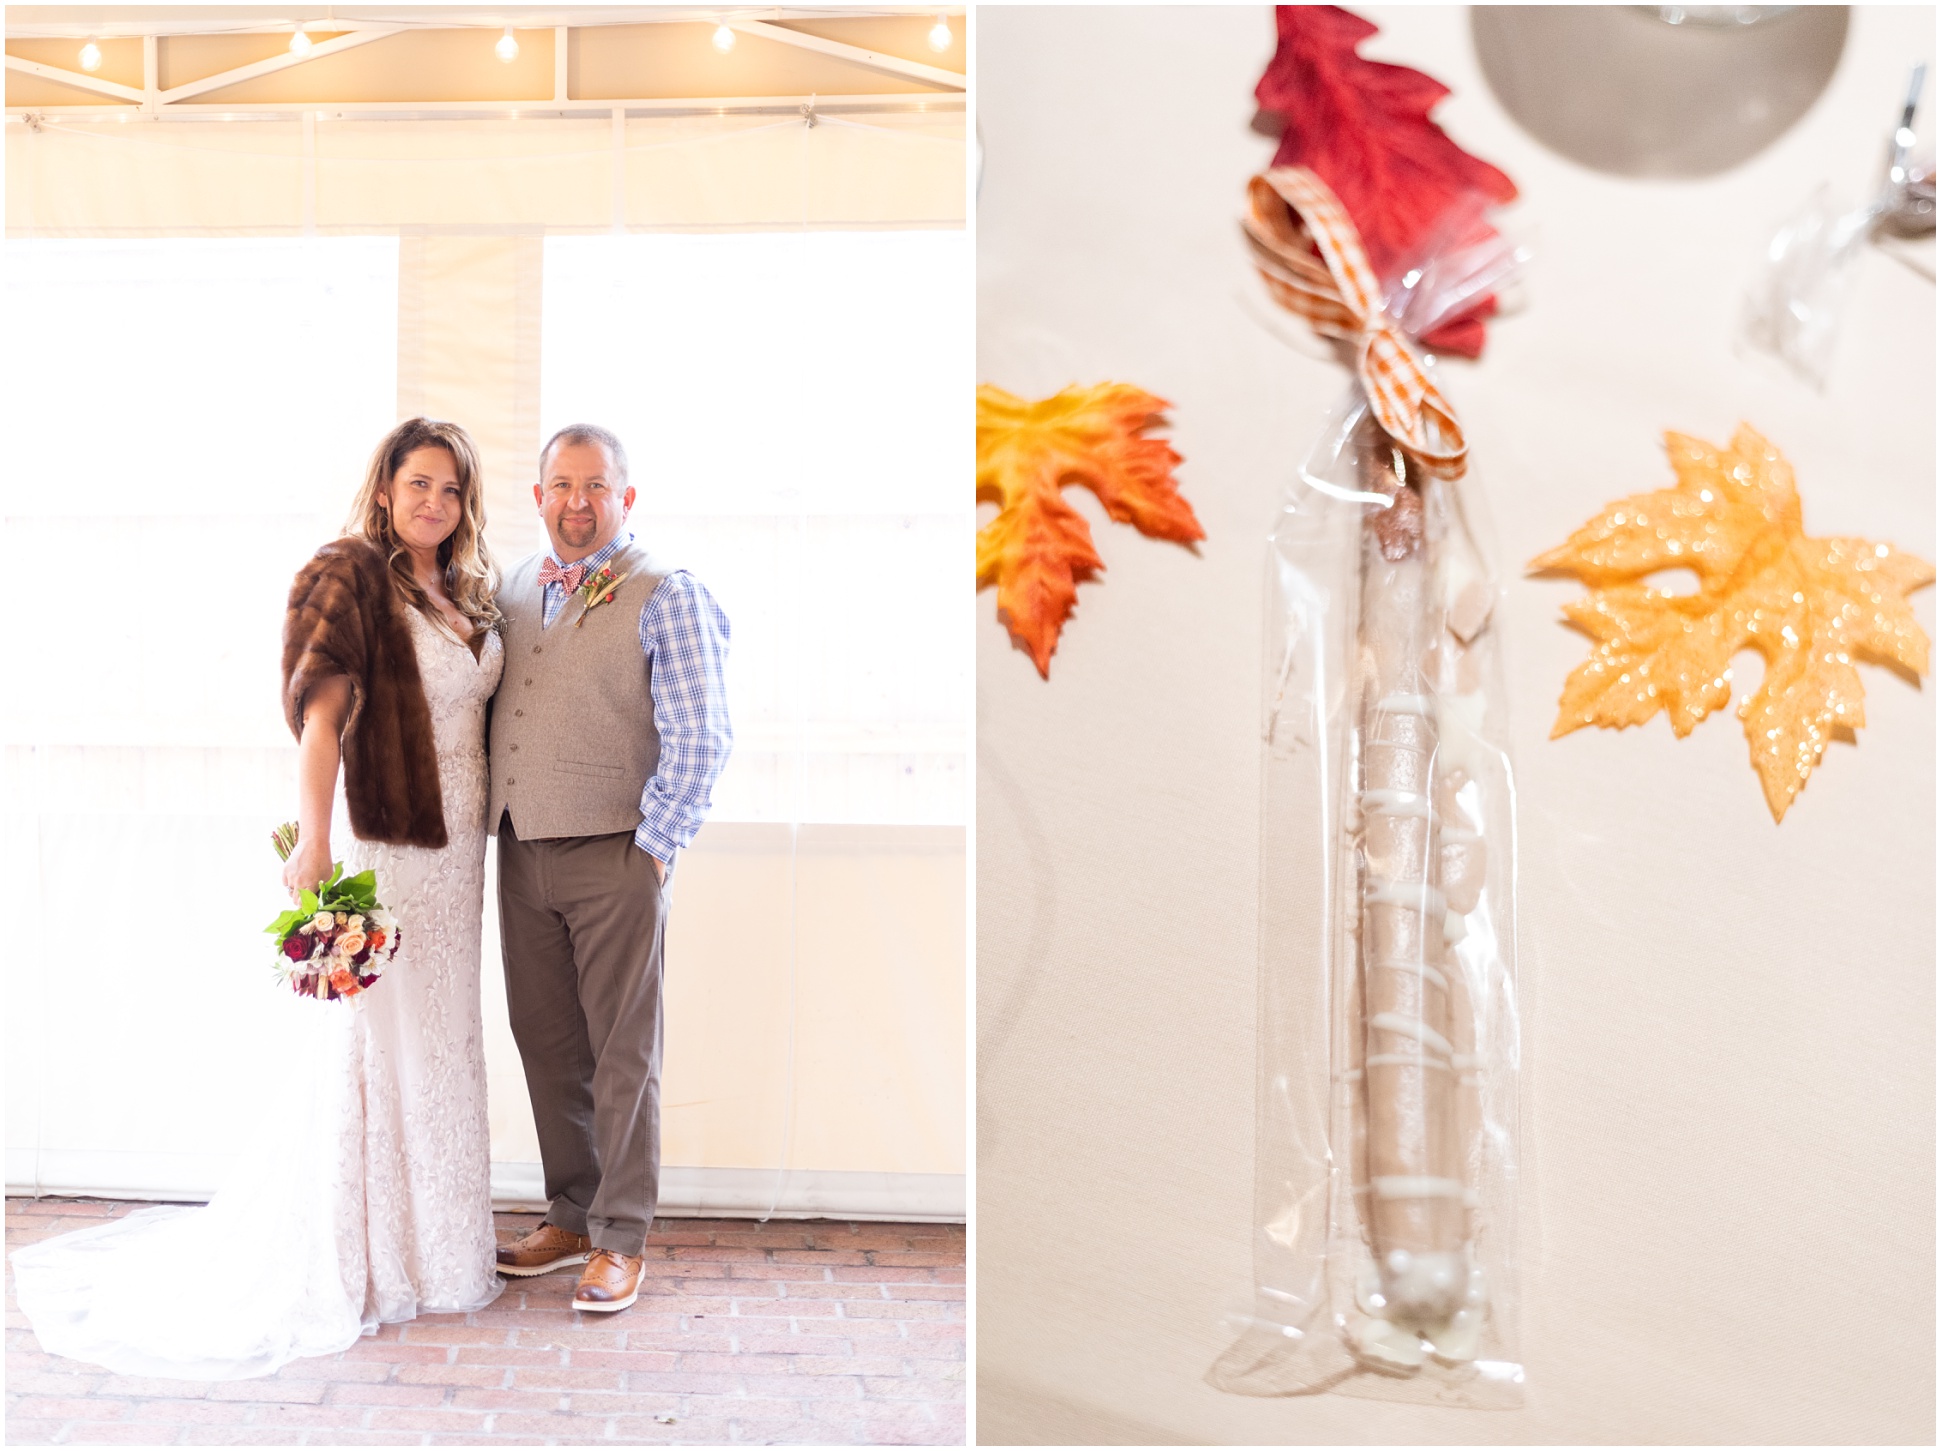 Left: bride and groom portrait inside tent, right: chocolate covered pretzel with fall leaves